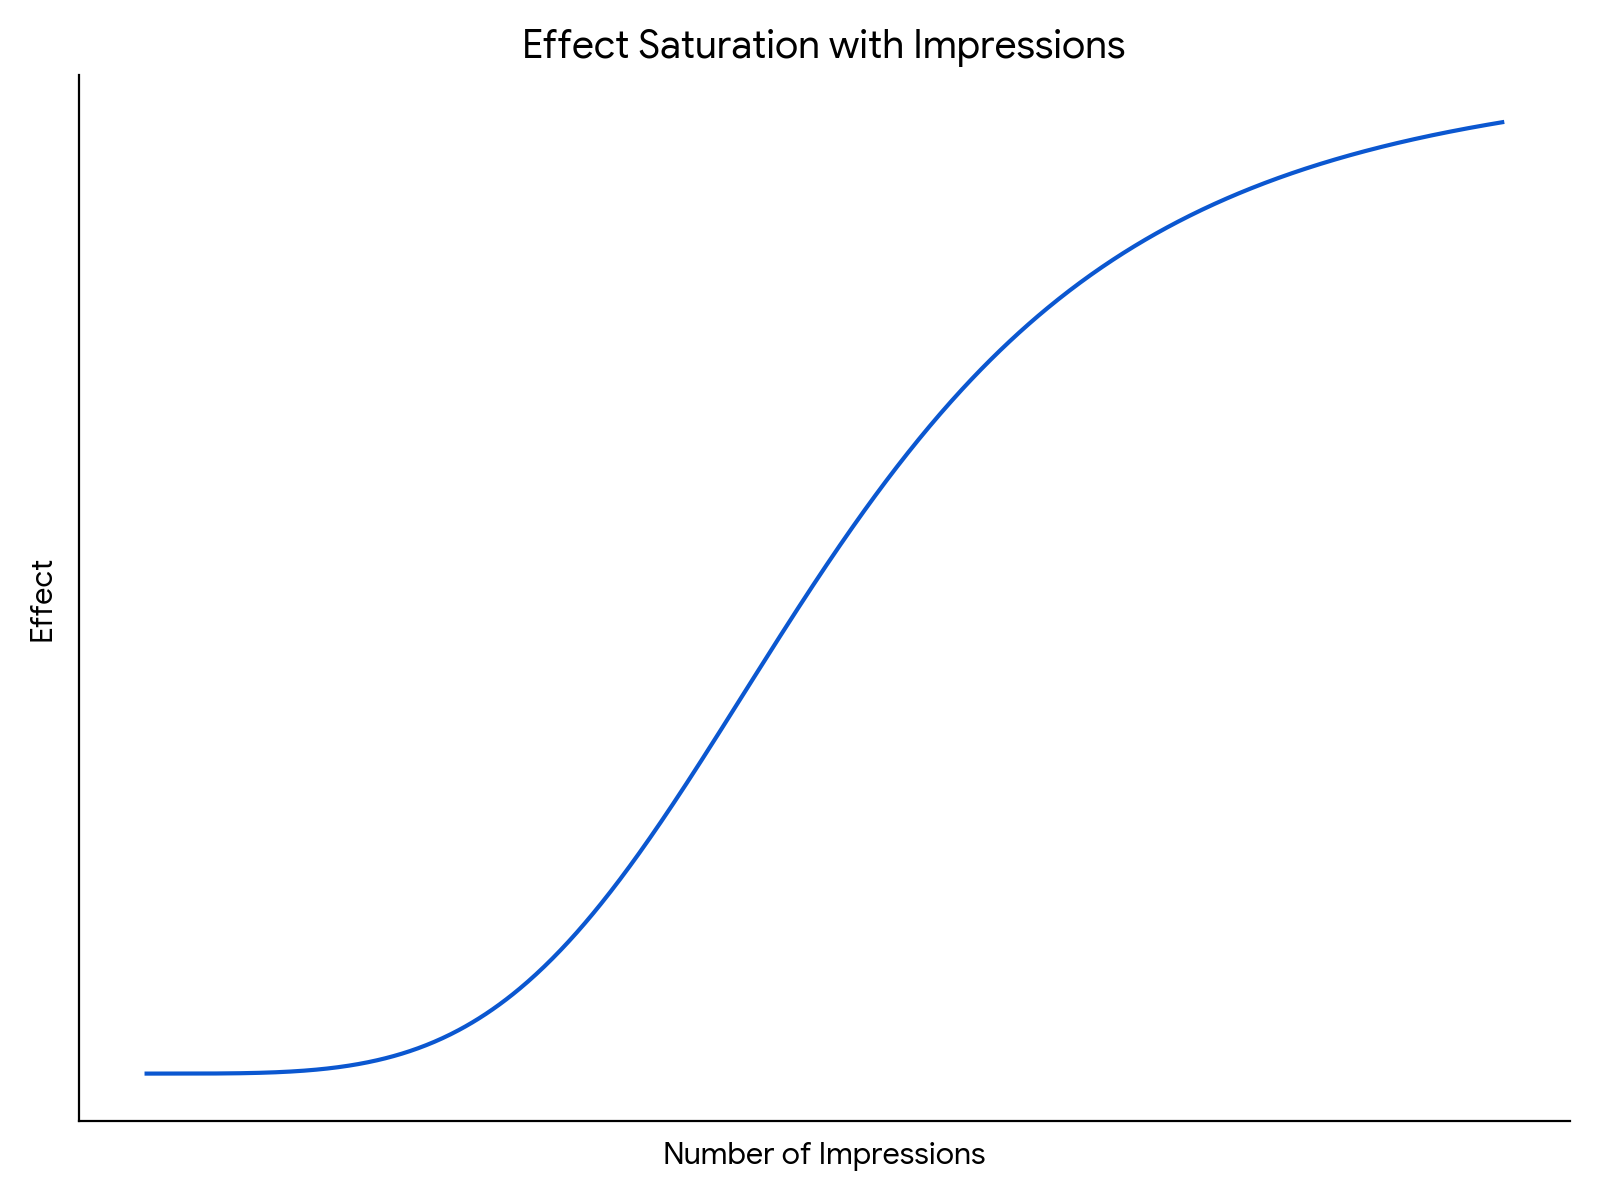 Saturation effects based on a Hill transformation function